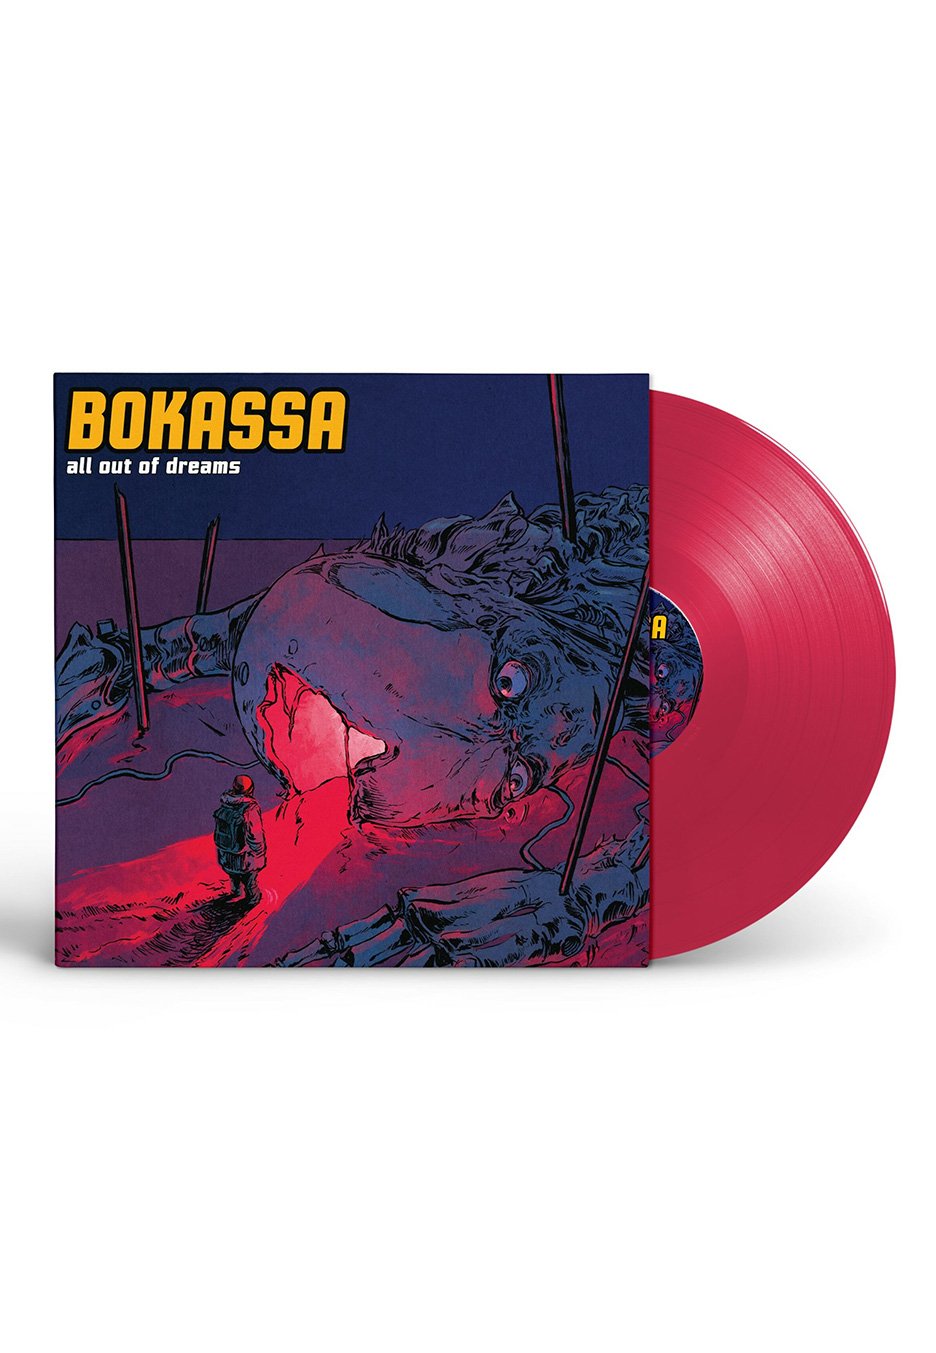 Bokassa - All Out Of Dreams Ltd. Red - Colored Vinyl